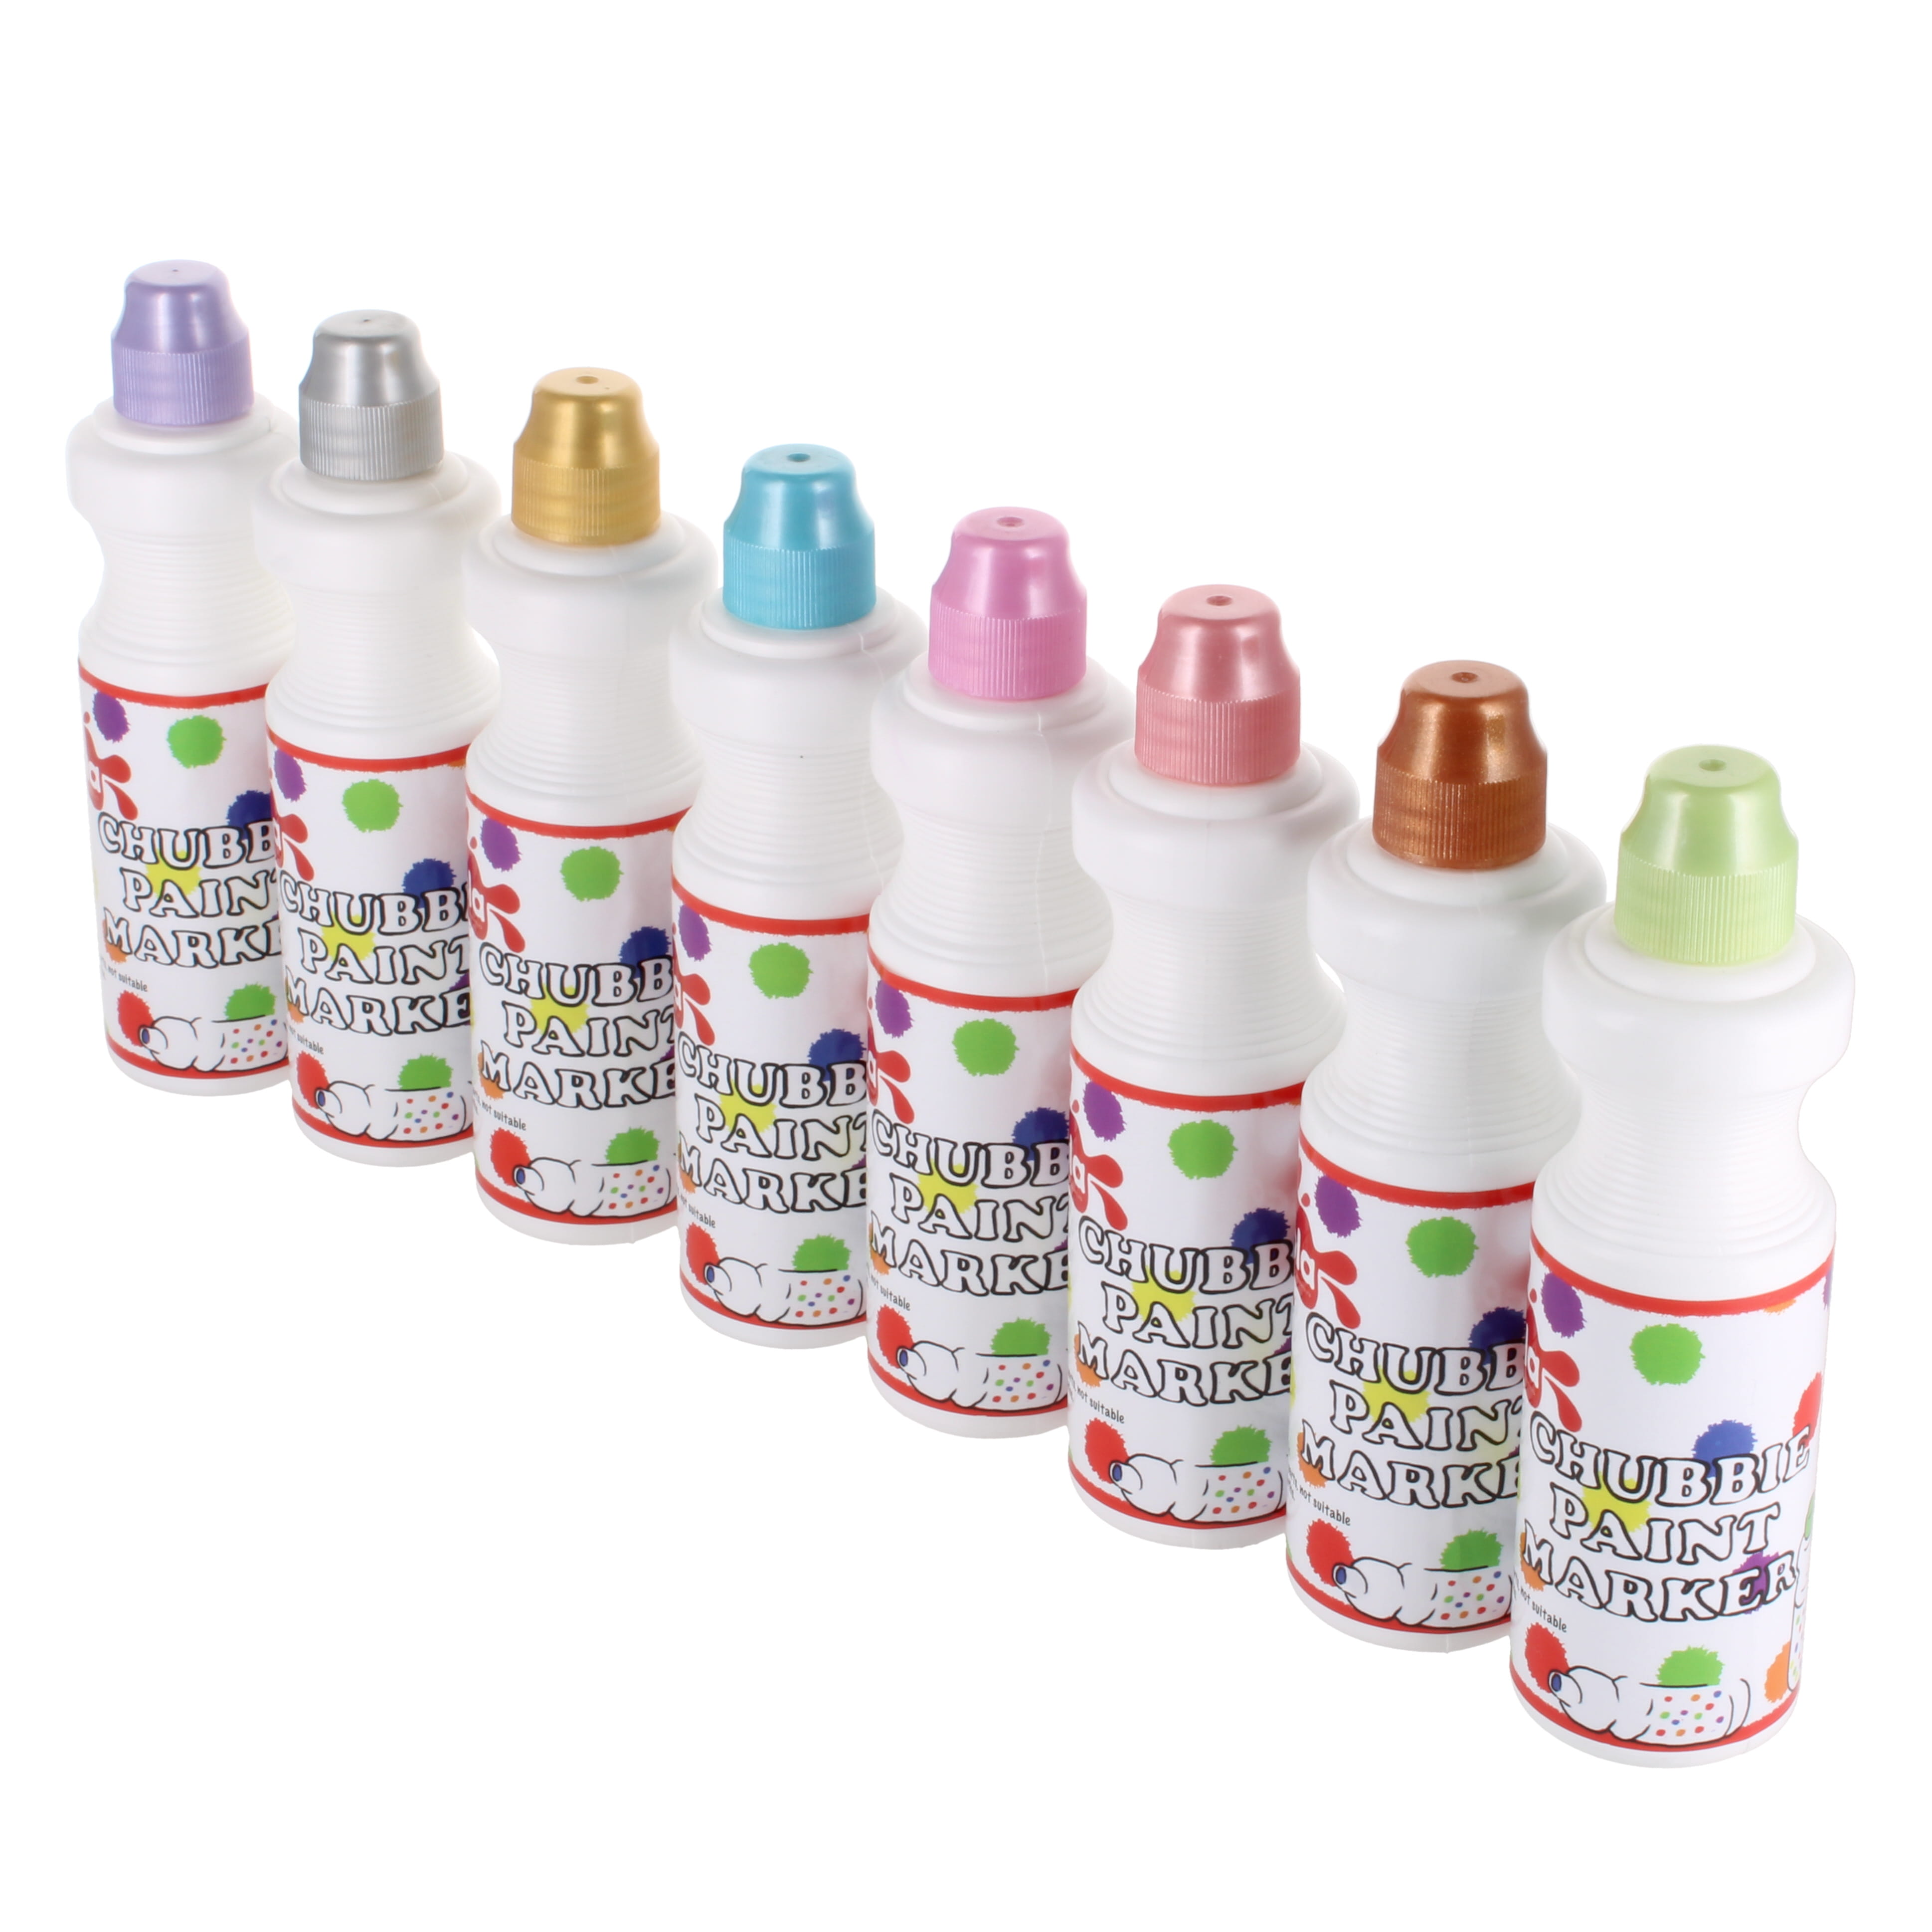 Chubbie Paint Markers Metallic Assorted - pack of 8 - STH28